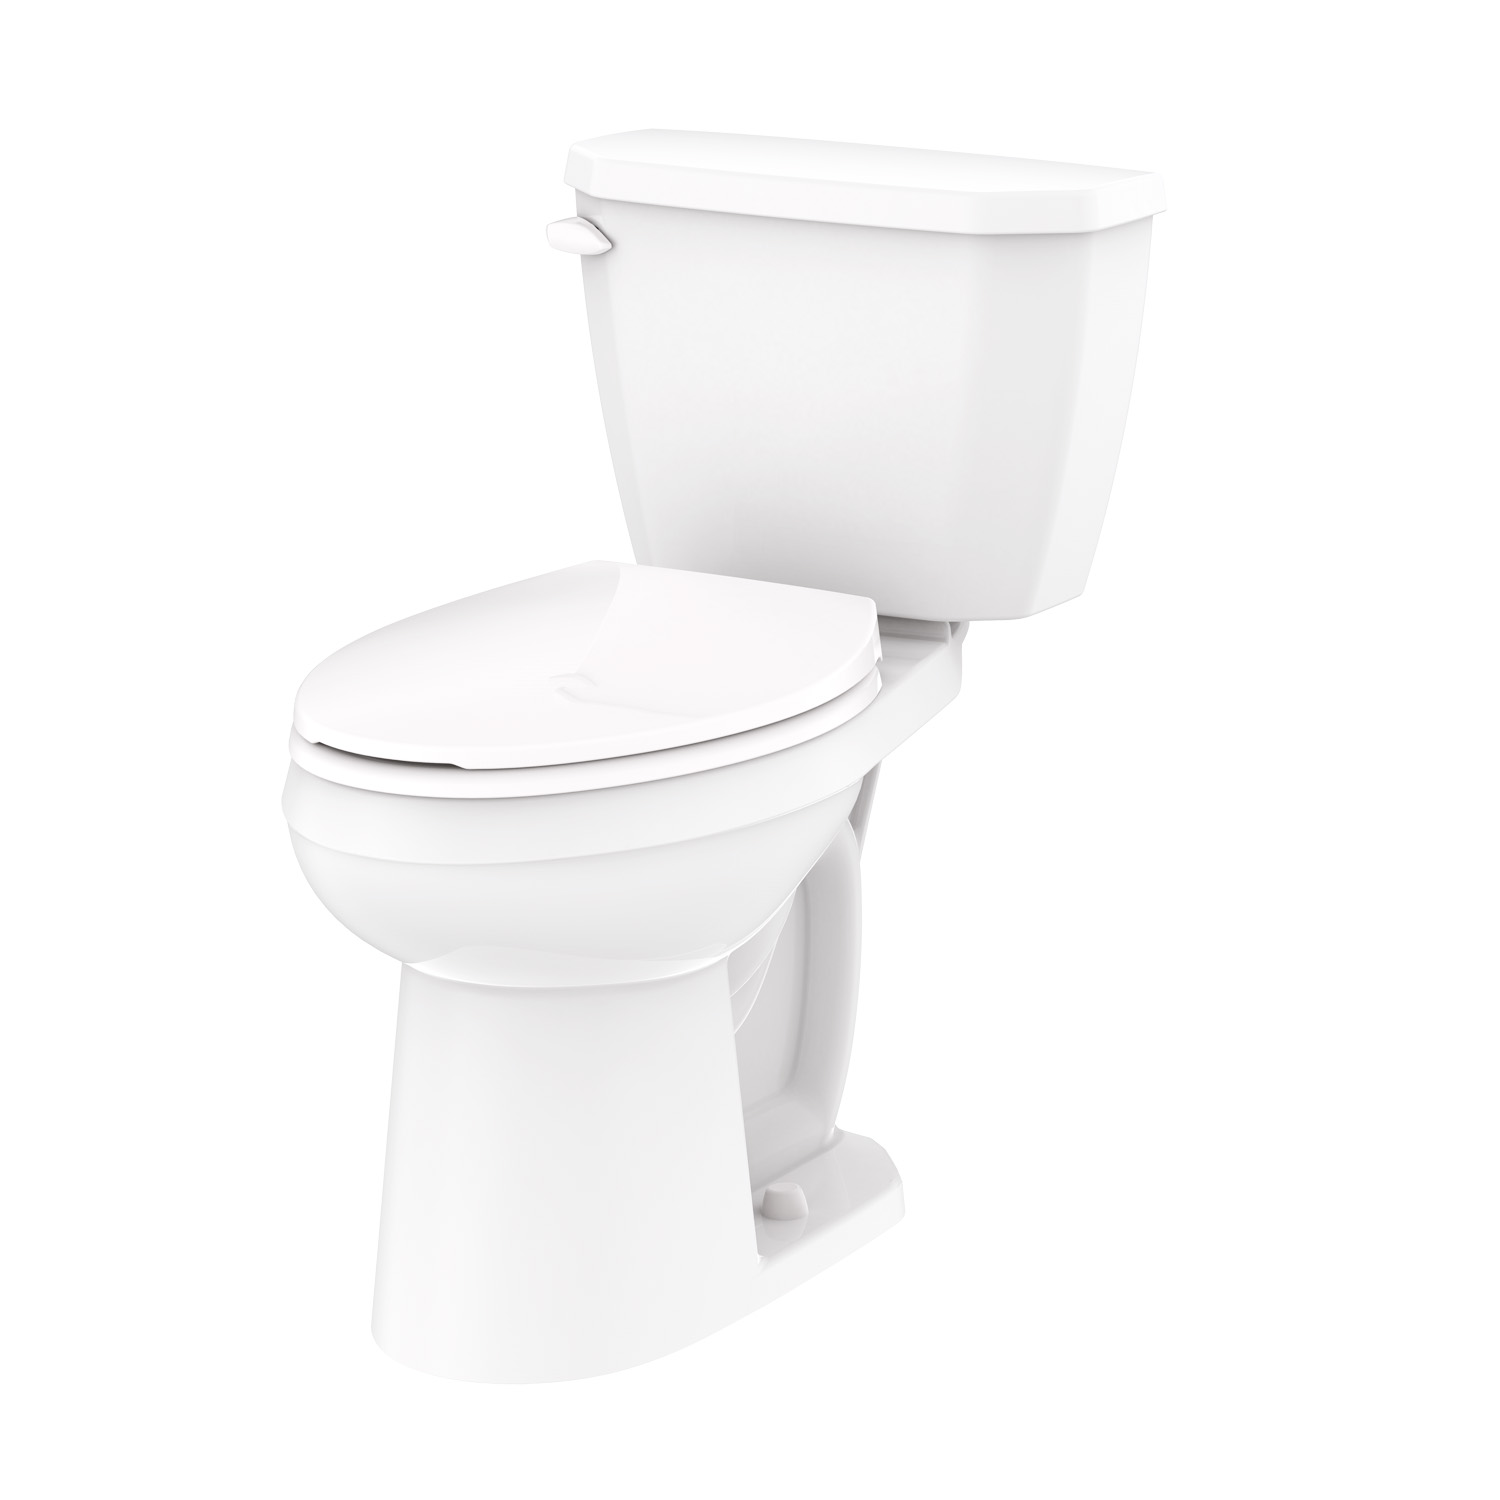 Gerber® GWS21872 Compact Toilet Bowl, Viper®, White, Elongated Shape, 12 in Rough-In, 2 in Trapway